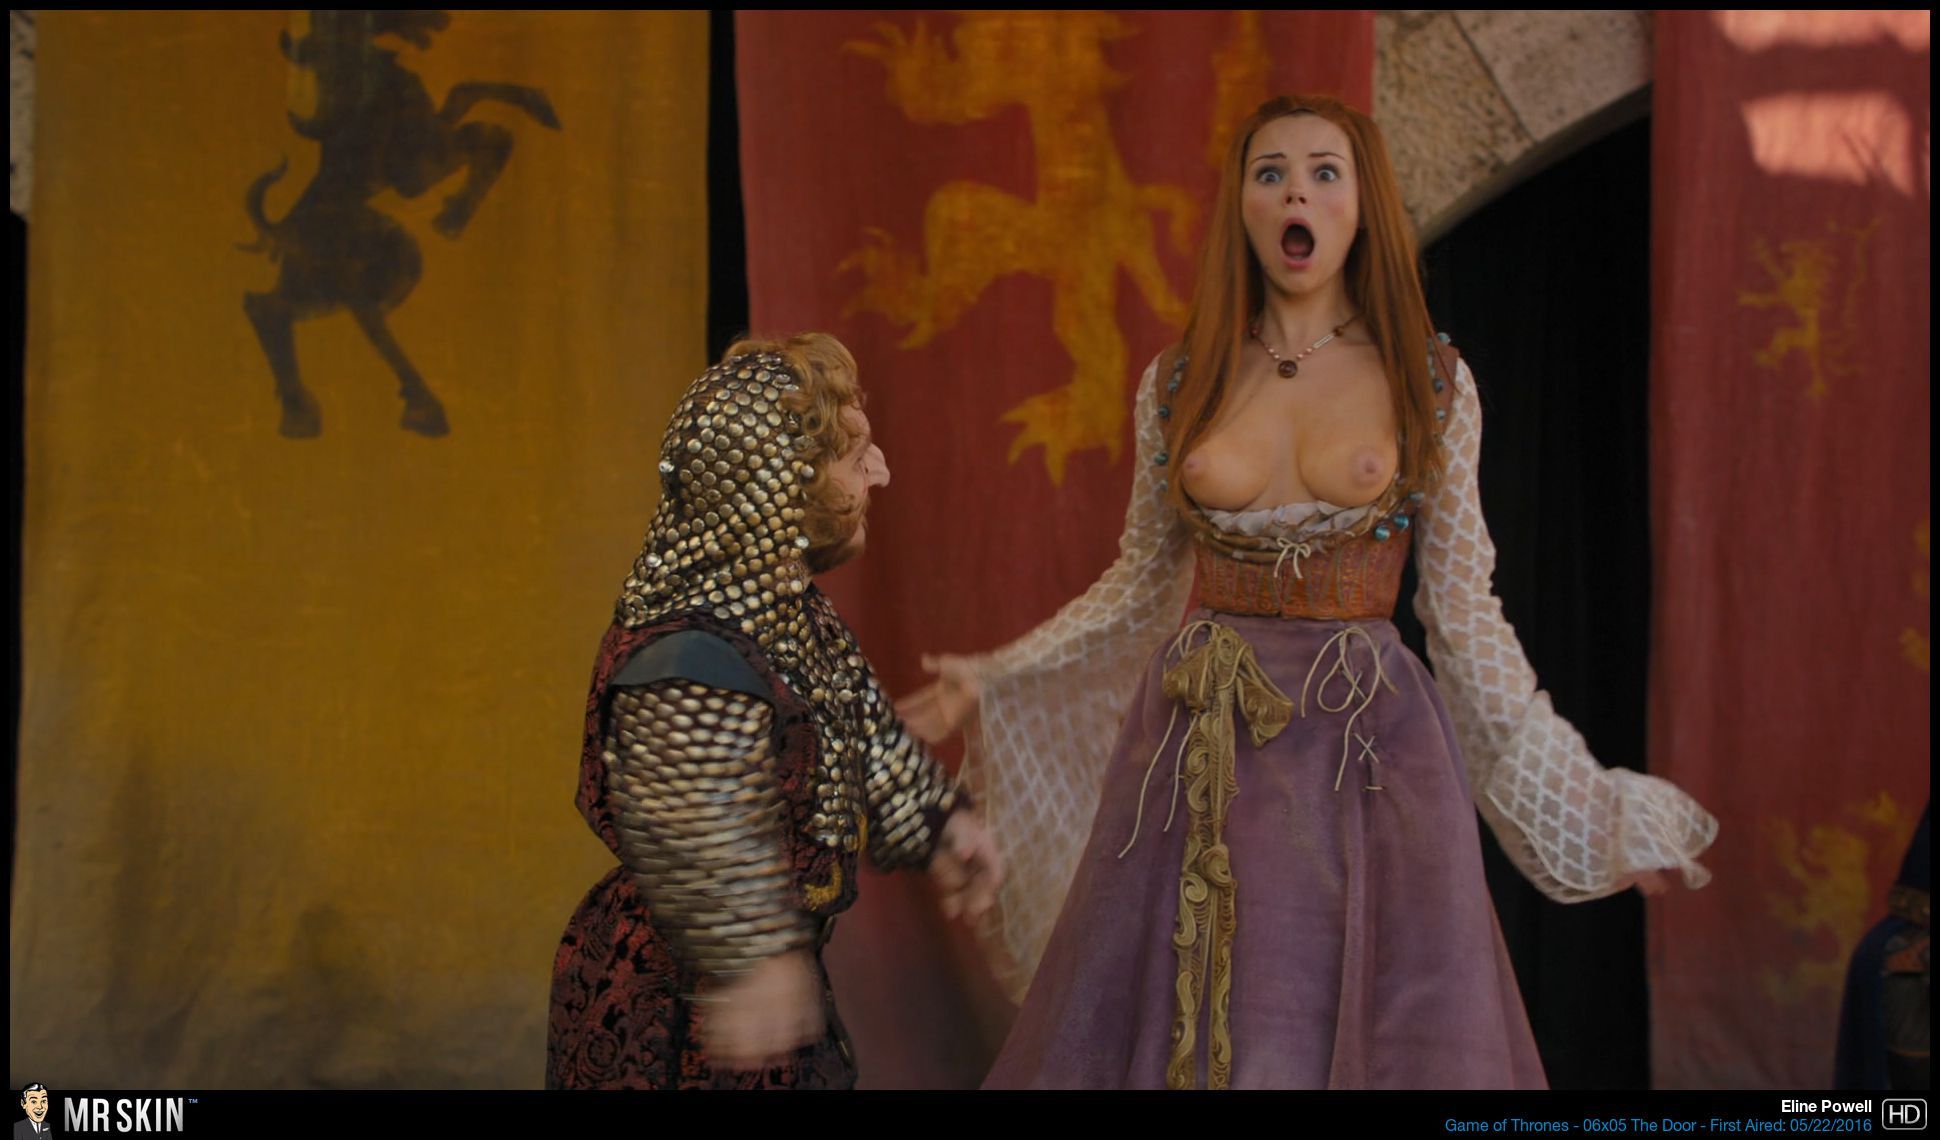 azuwan azahar recommends Nude Pictures From Game Of Thrones